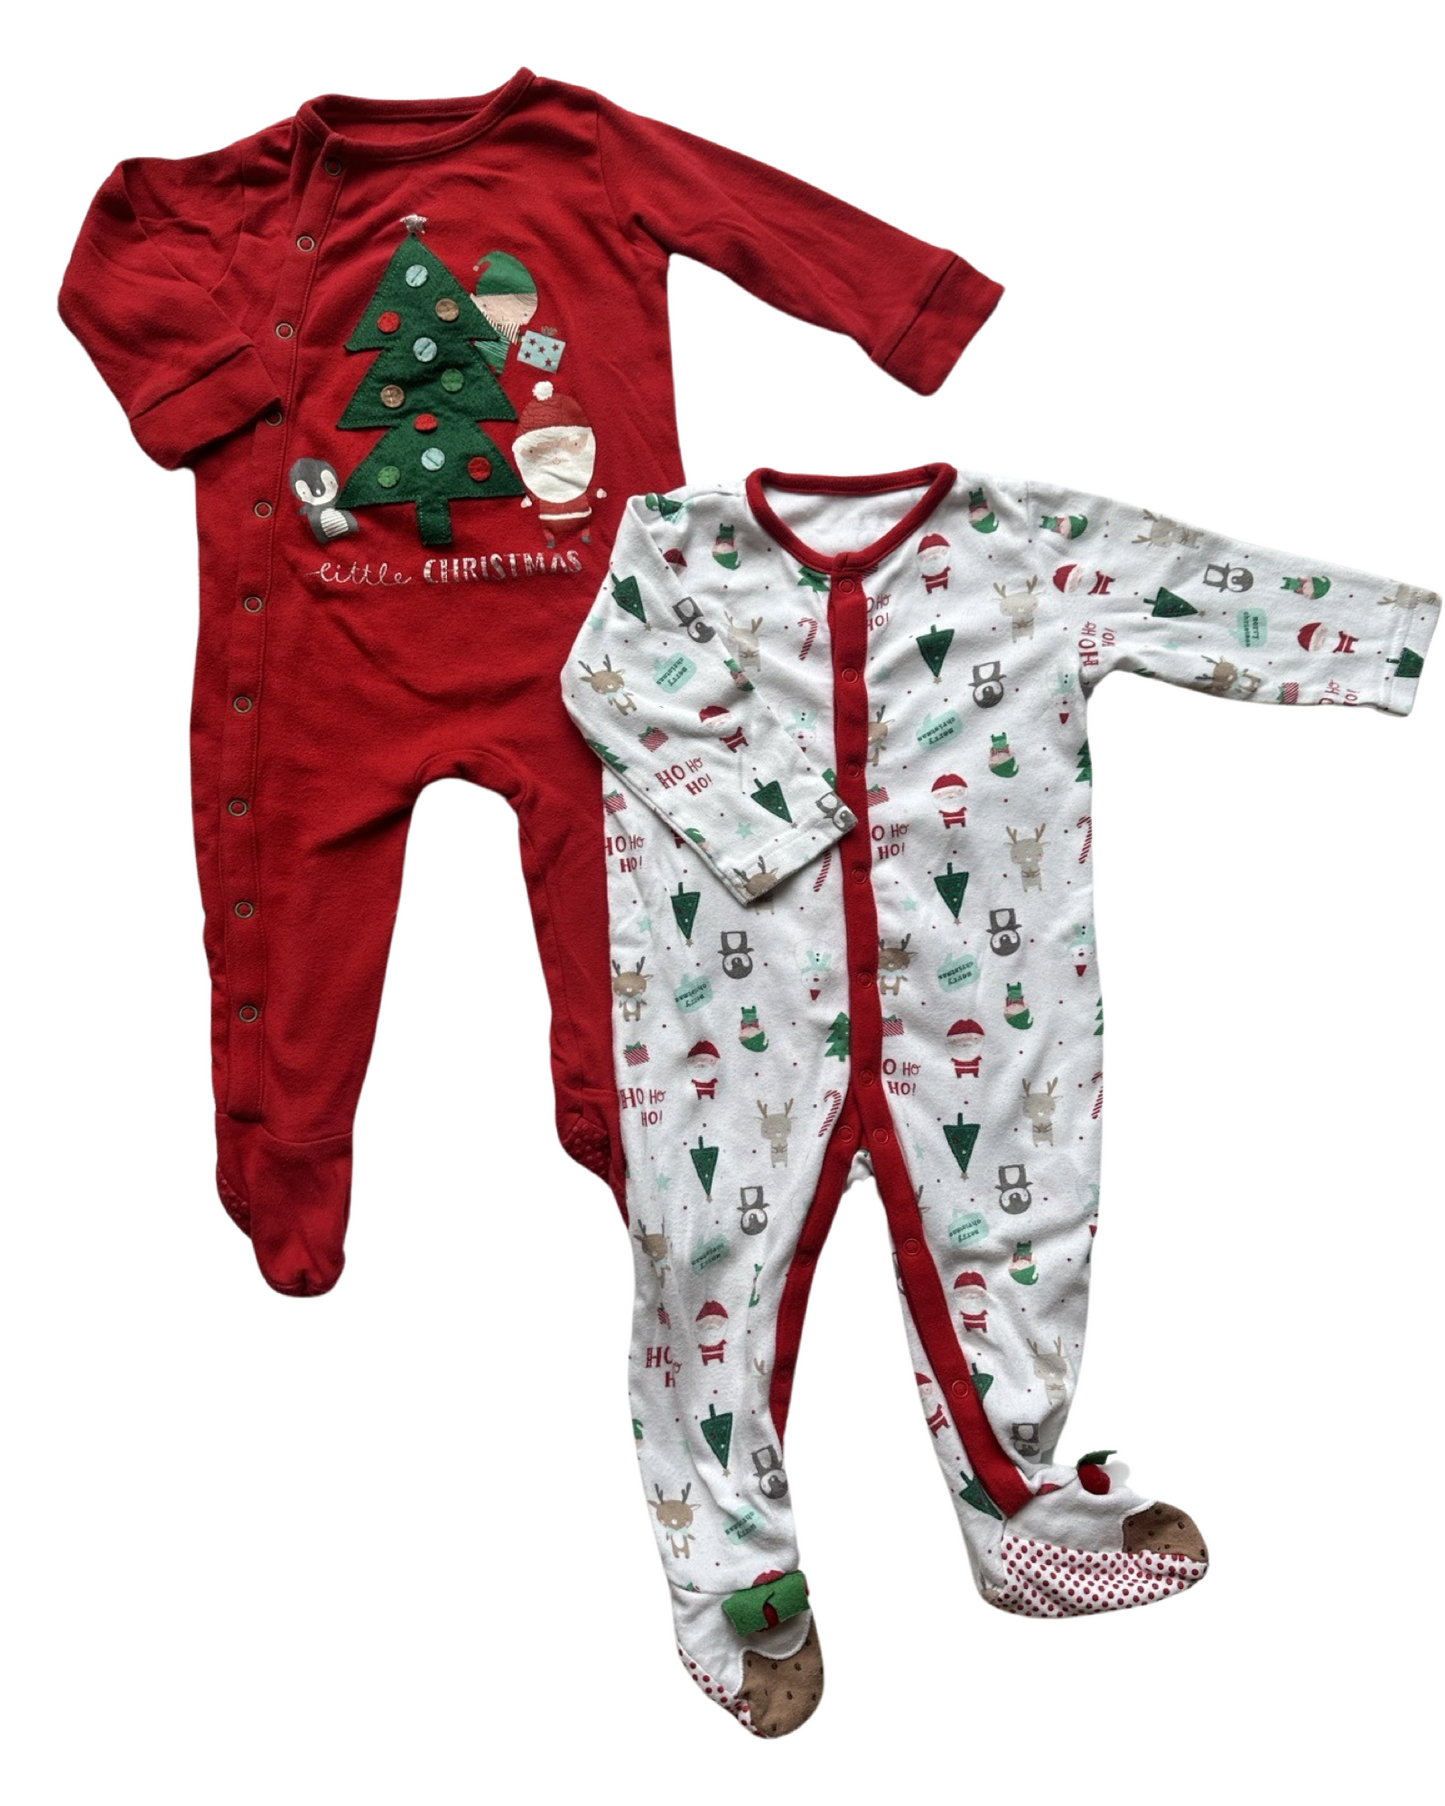 Mothercare christmas onesies x 2 (size 9-12mths)